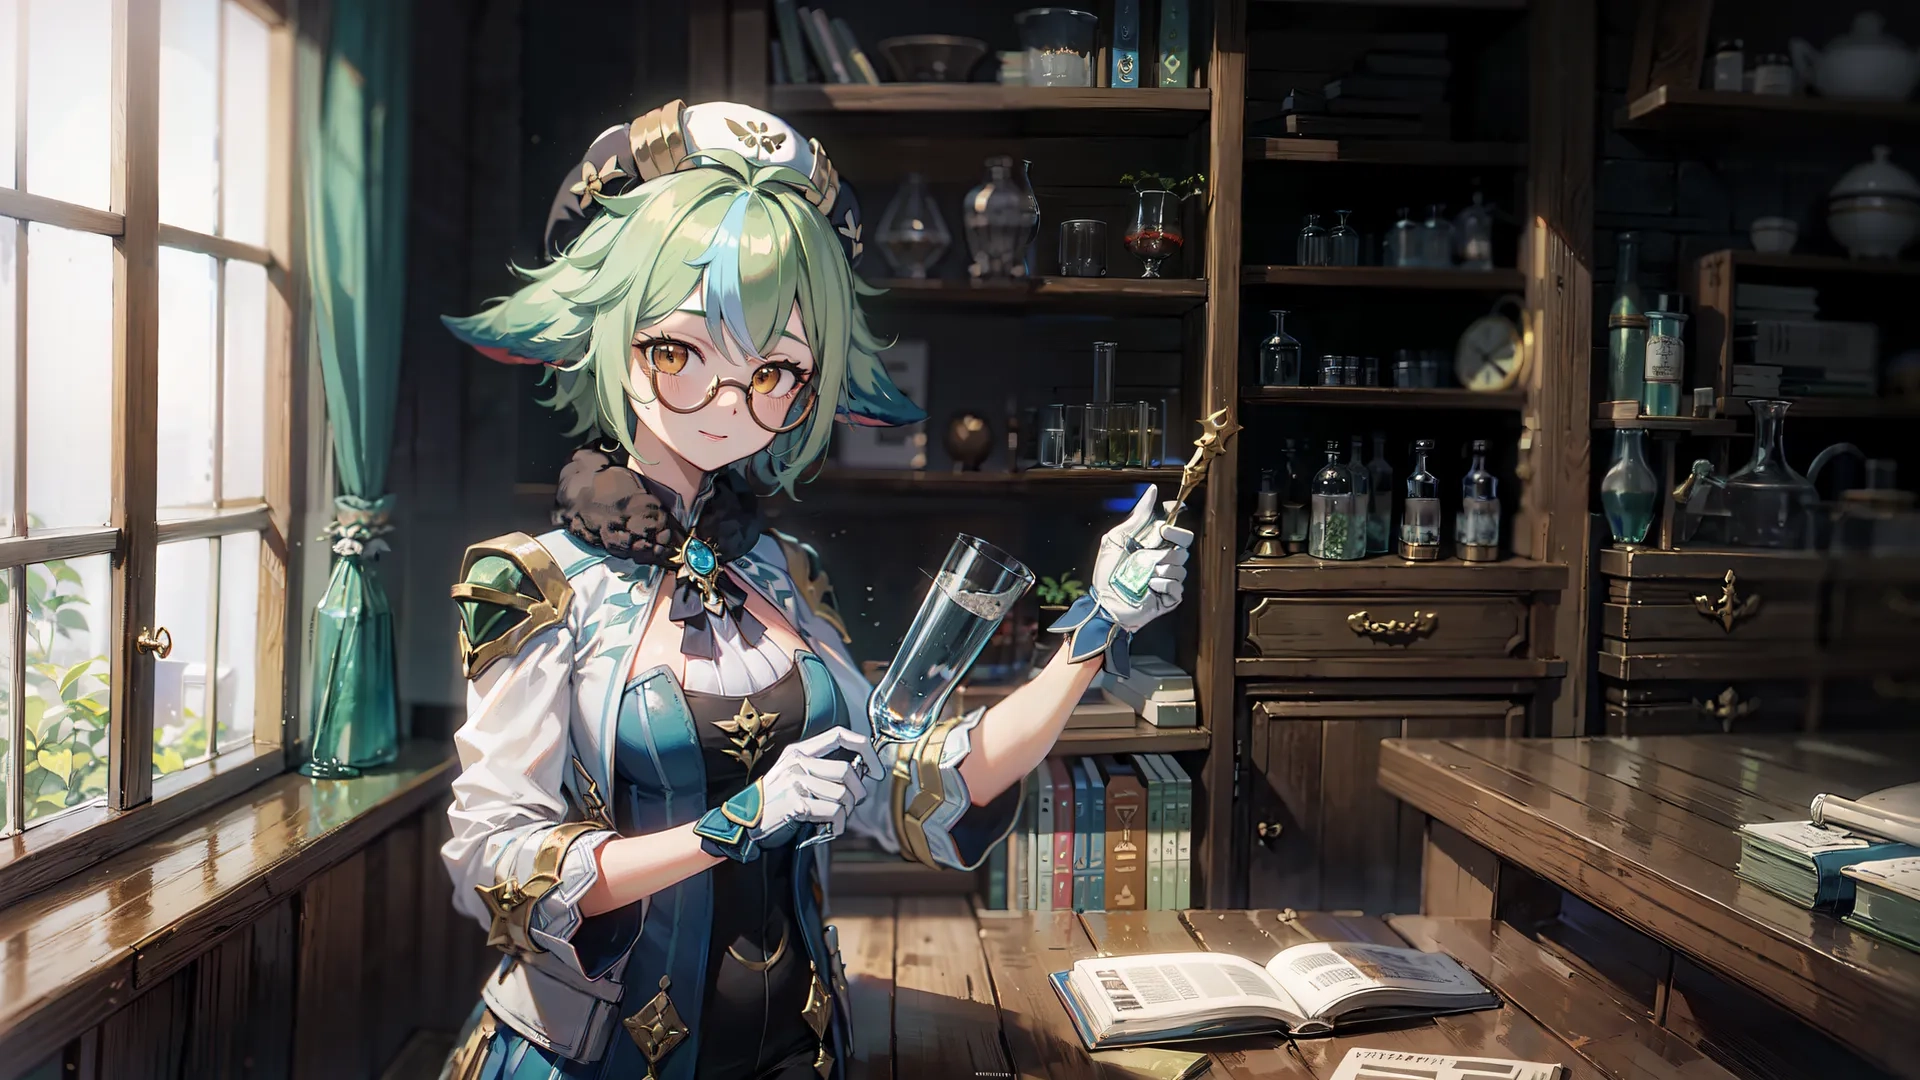 the young girl in the costume is holding a glass item and a book in her hand beside some bookshelves and window boxes on wooden table
